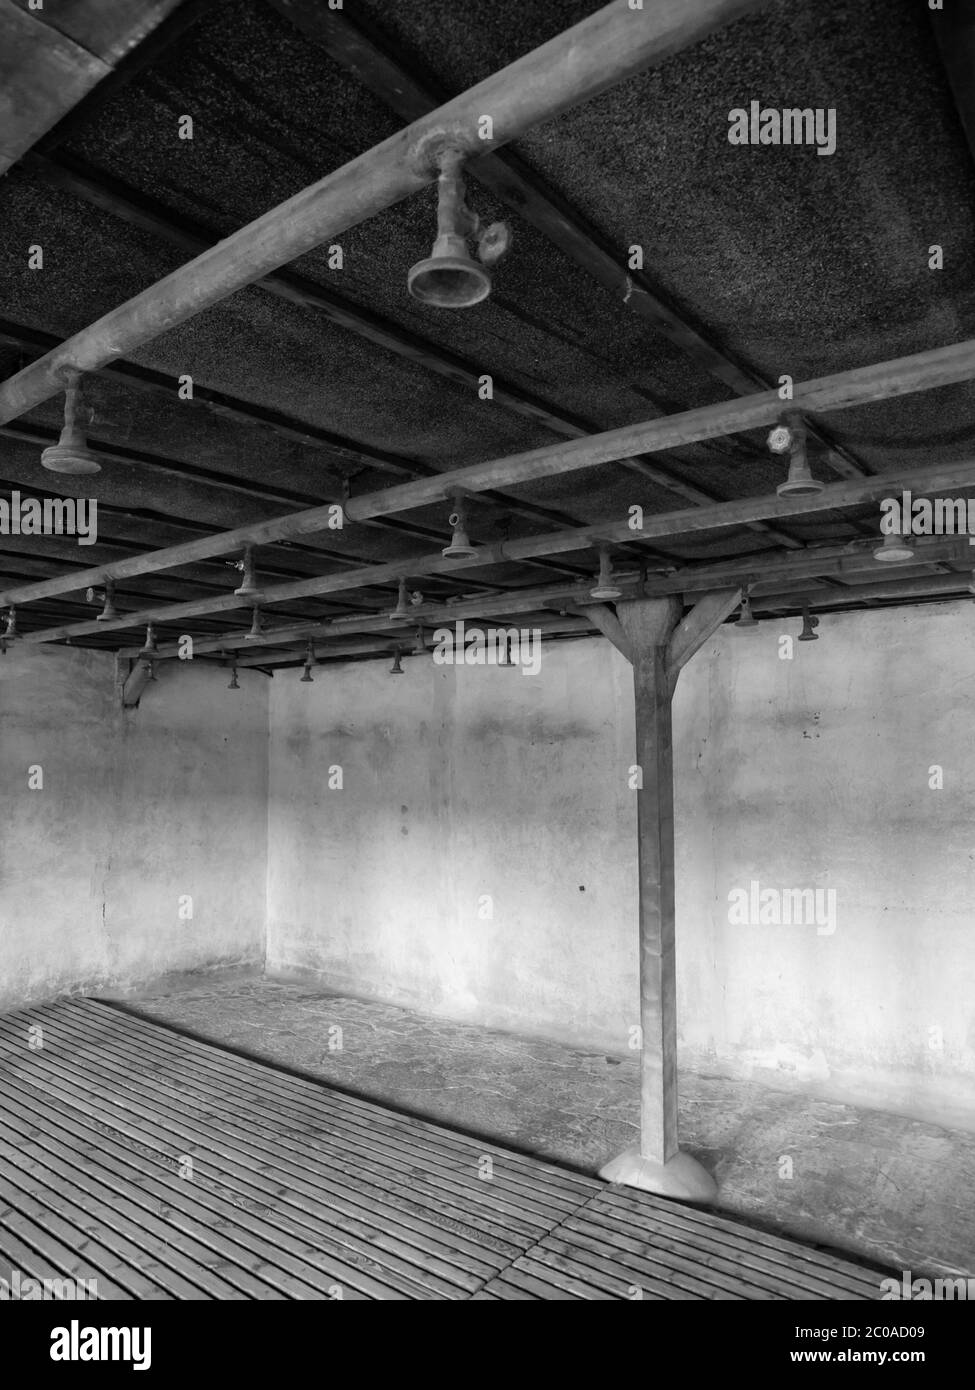 Bathroom with showers in concentration camp. In black and white. Stock Photo